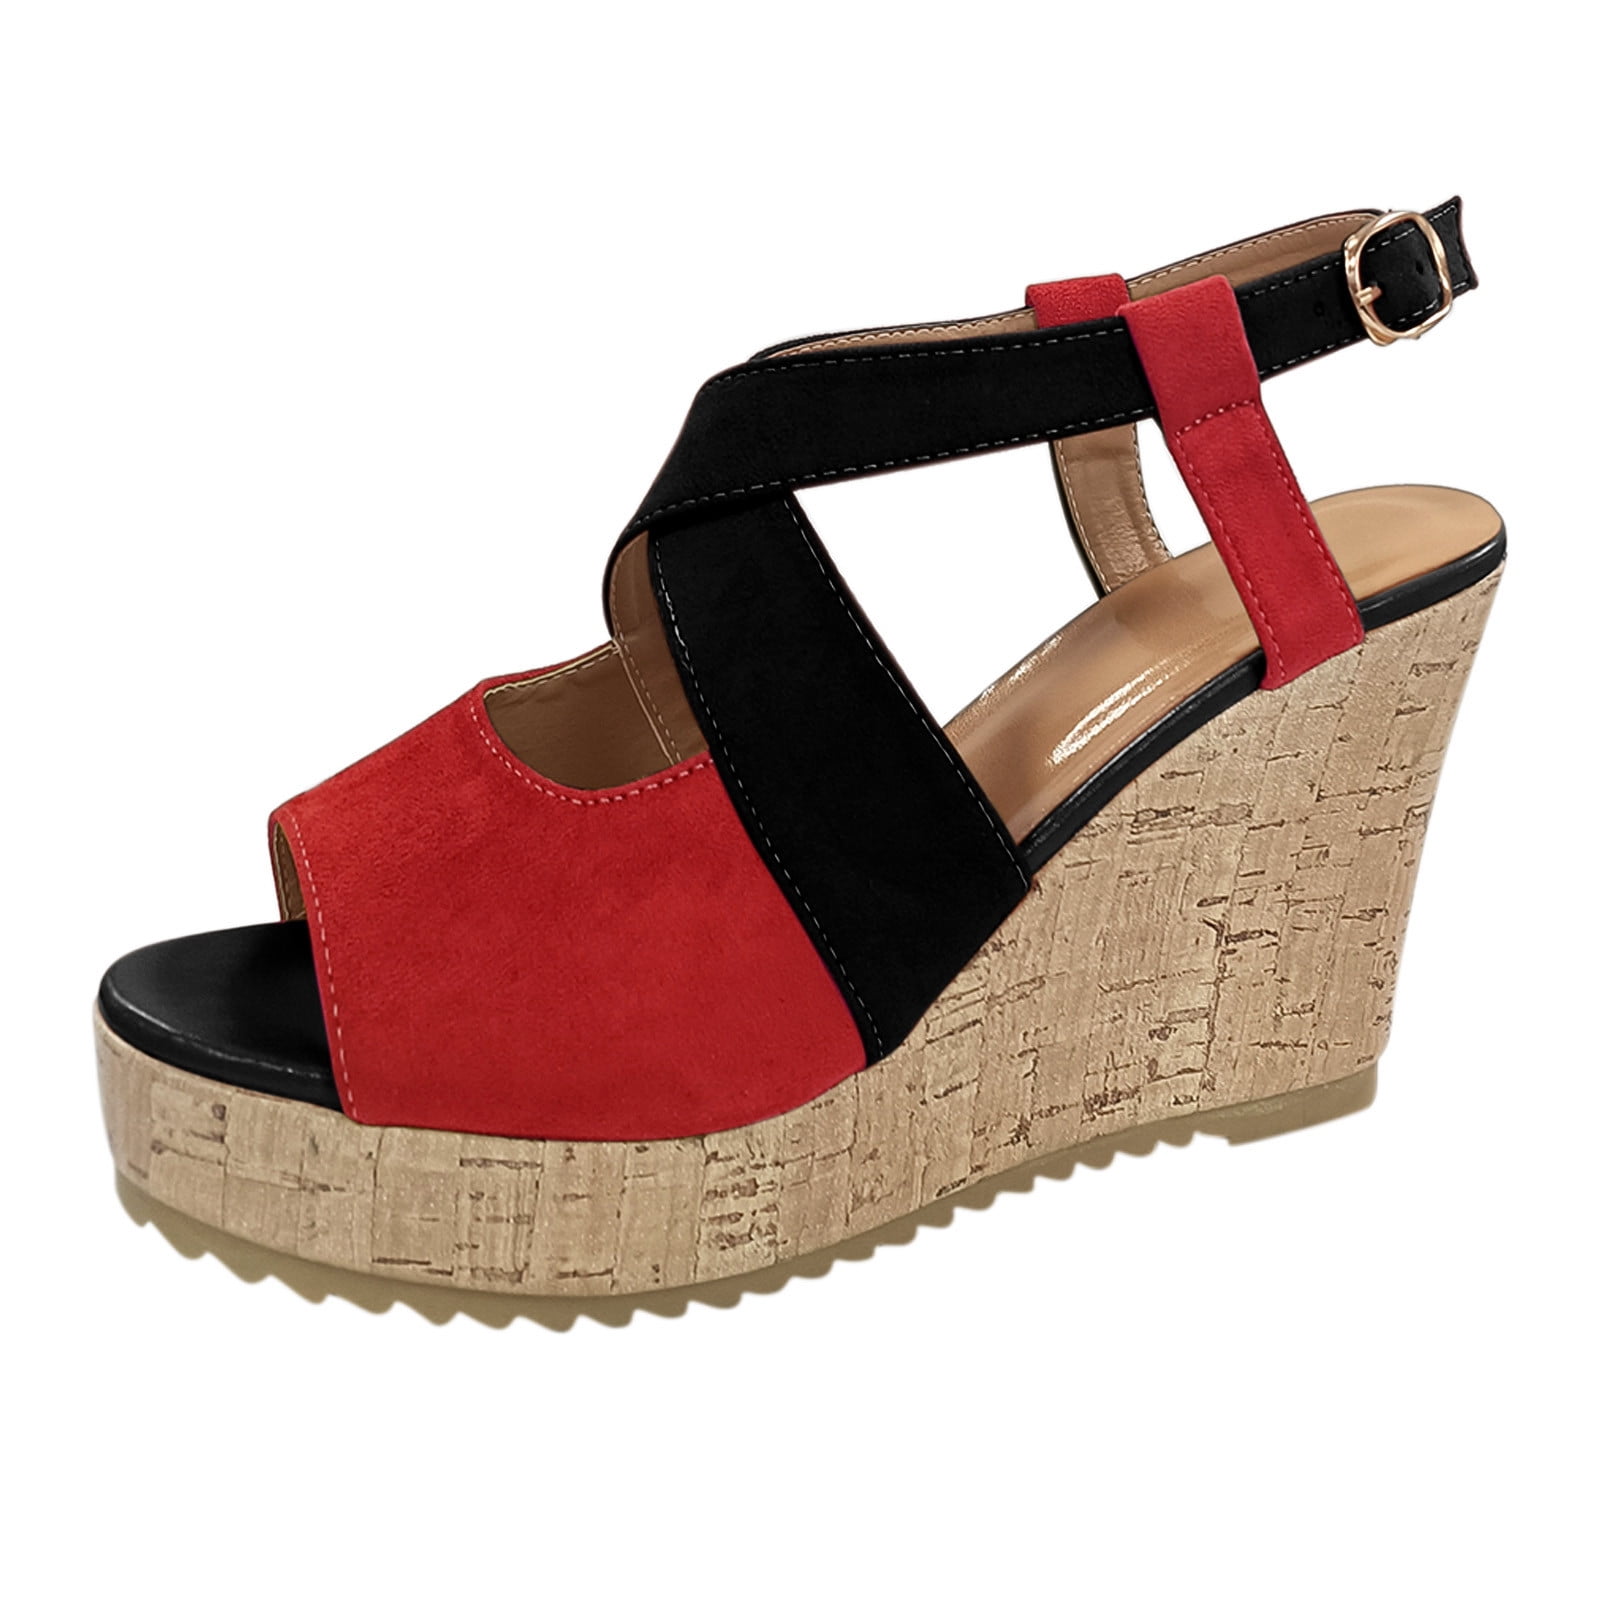 CBGELRT Womens Sandals Red Shoes Platform Casual Wedges Solid Sandals for Women Buckle Fashion Roman Sandal Women's Sandals Low Heels for Women -